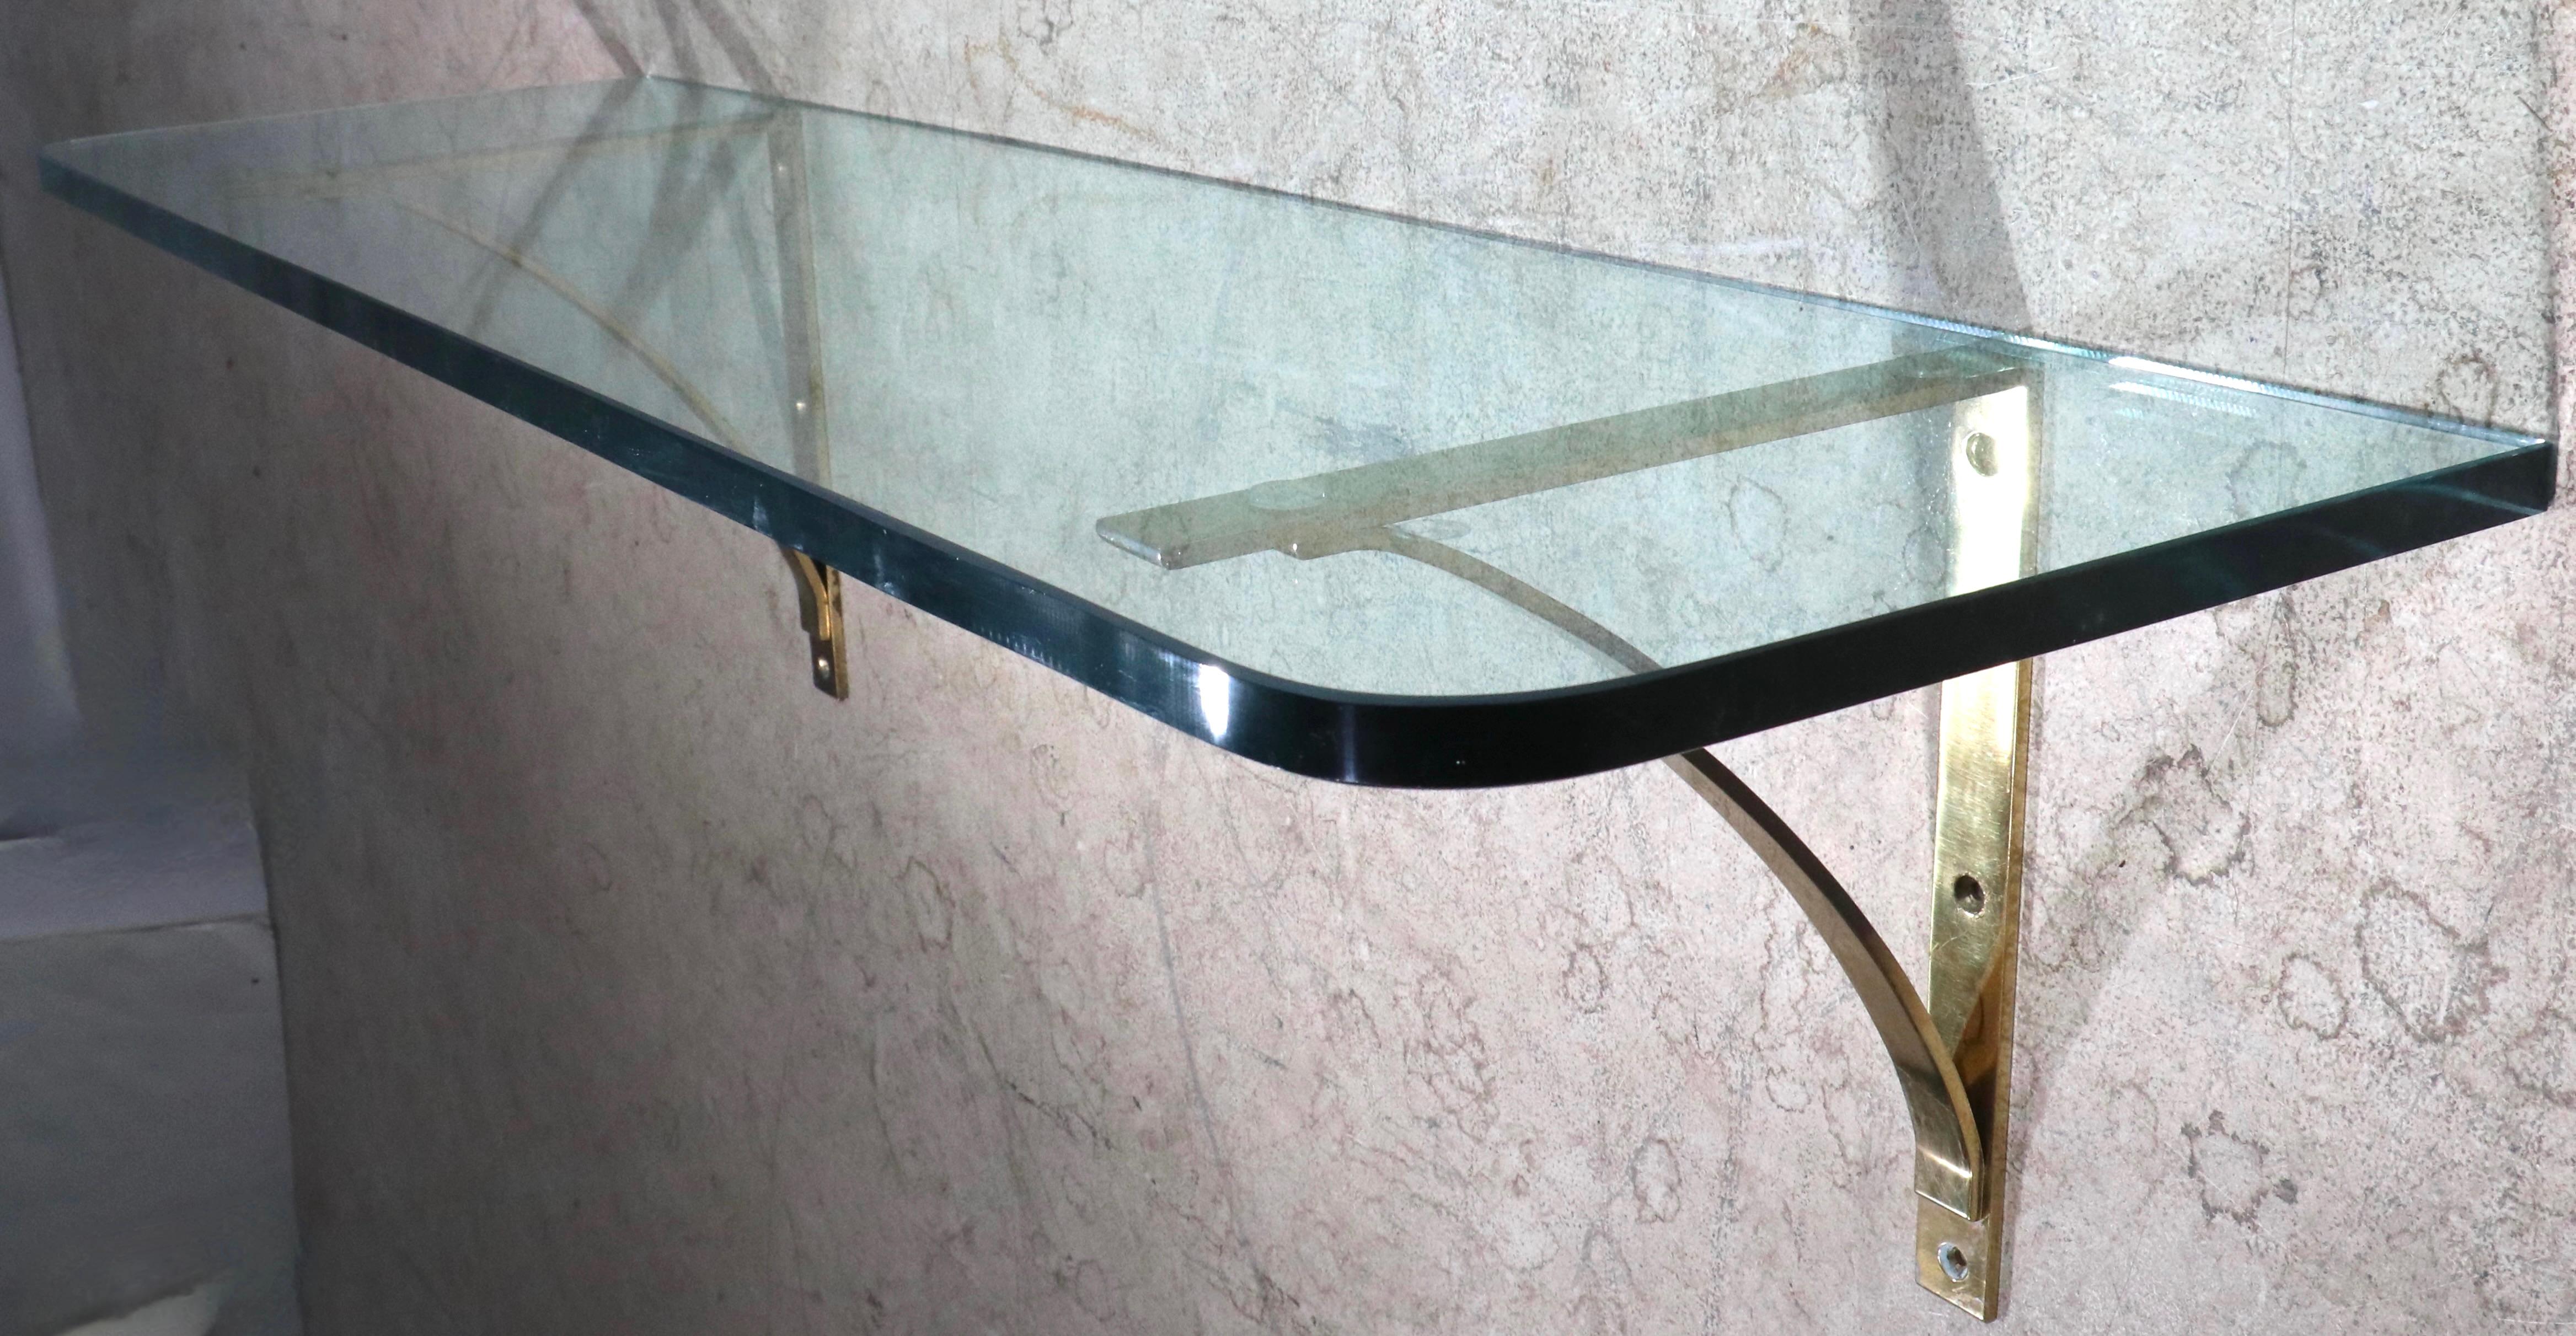 Post Modern Plate Glass and Brass Wall Mount Shelf, C. 1970's For Sale 4